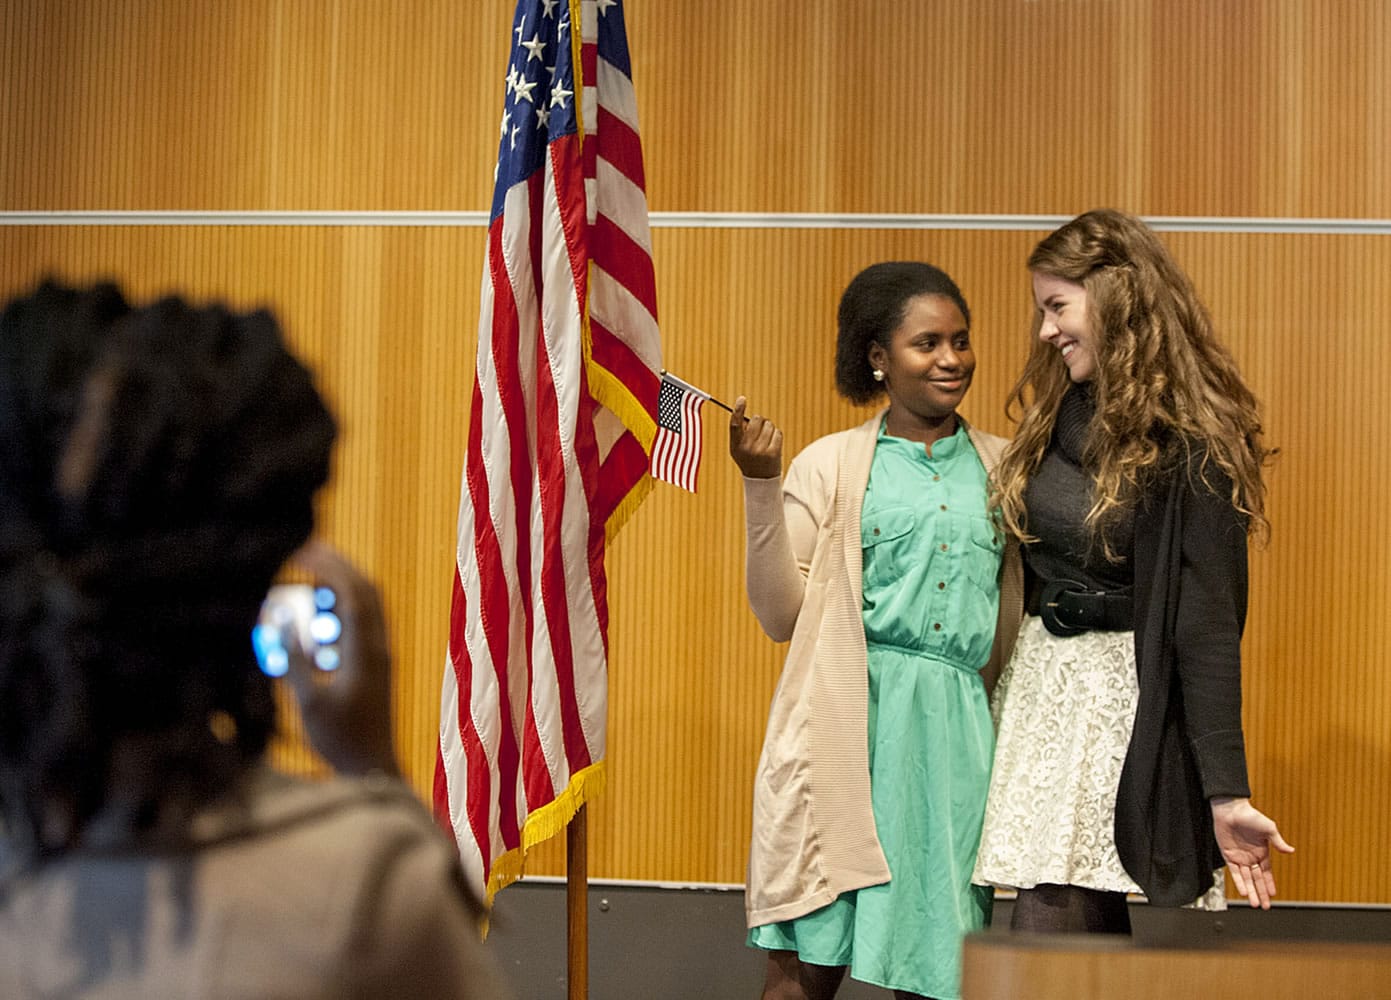 Amina Idy of Portland, holding flag, celebrates her U.S. citizenship Tuesday by having her photograph taken with friend Megan Tragethon at the Vancouver Community Library.